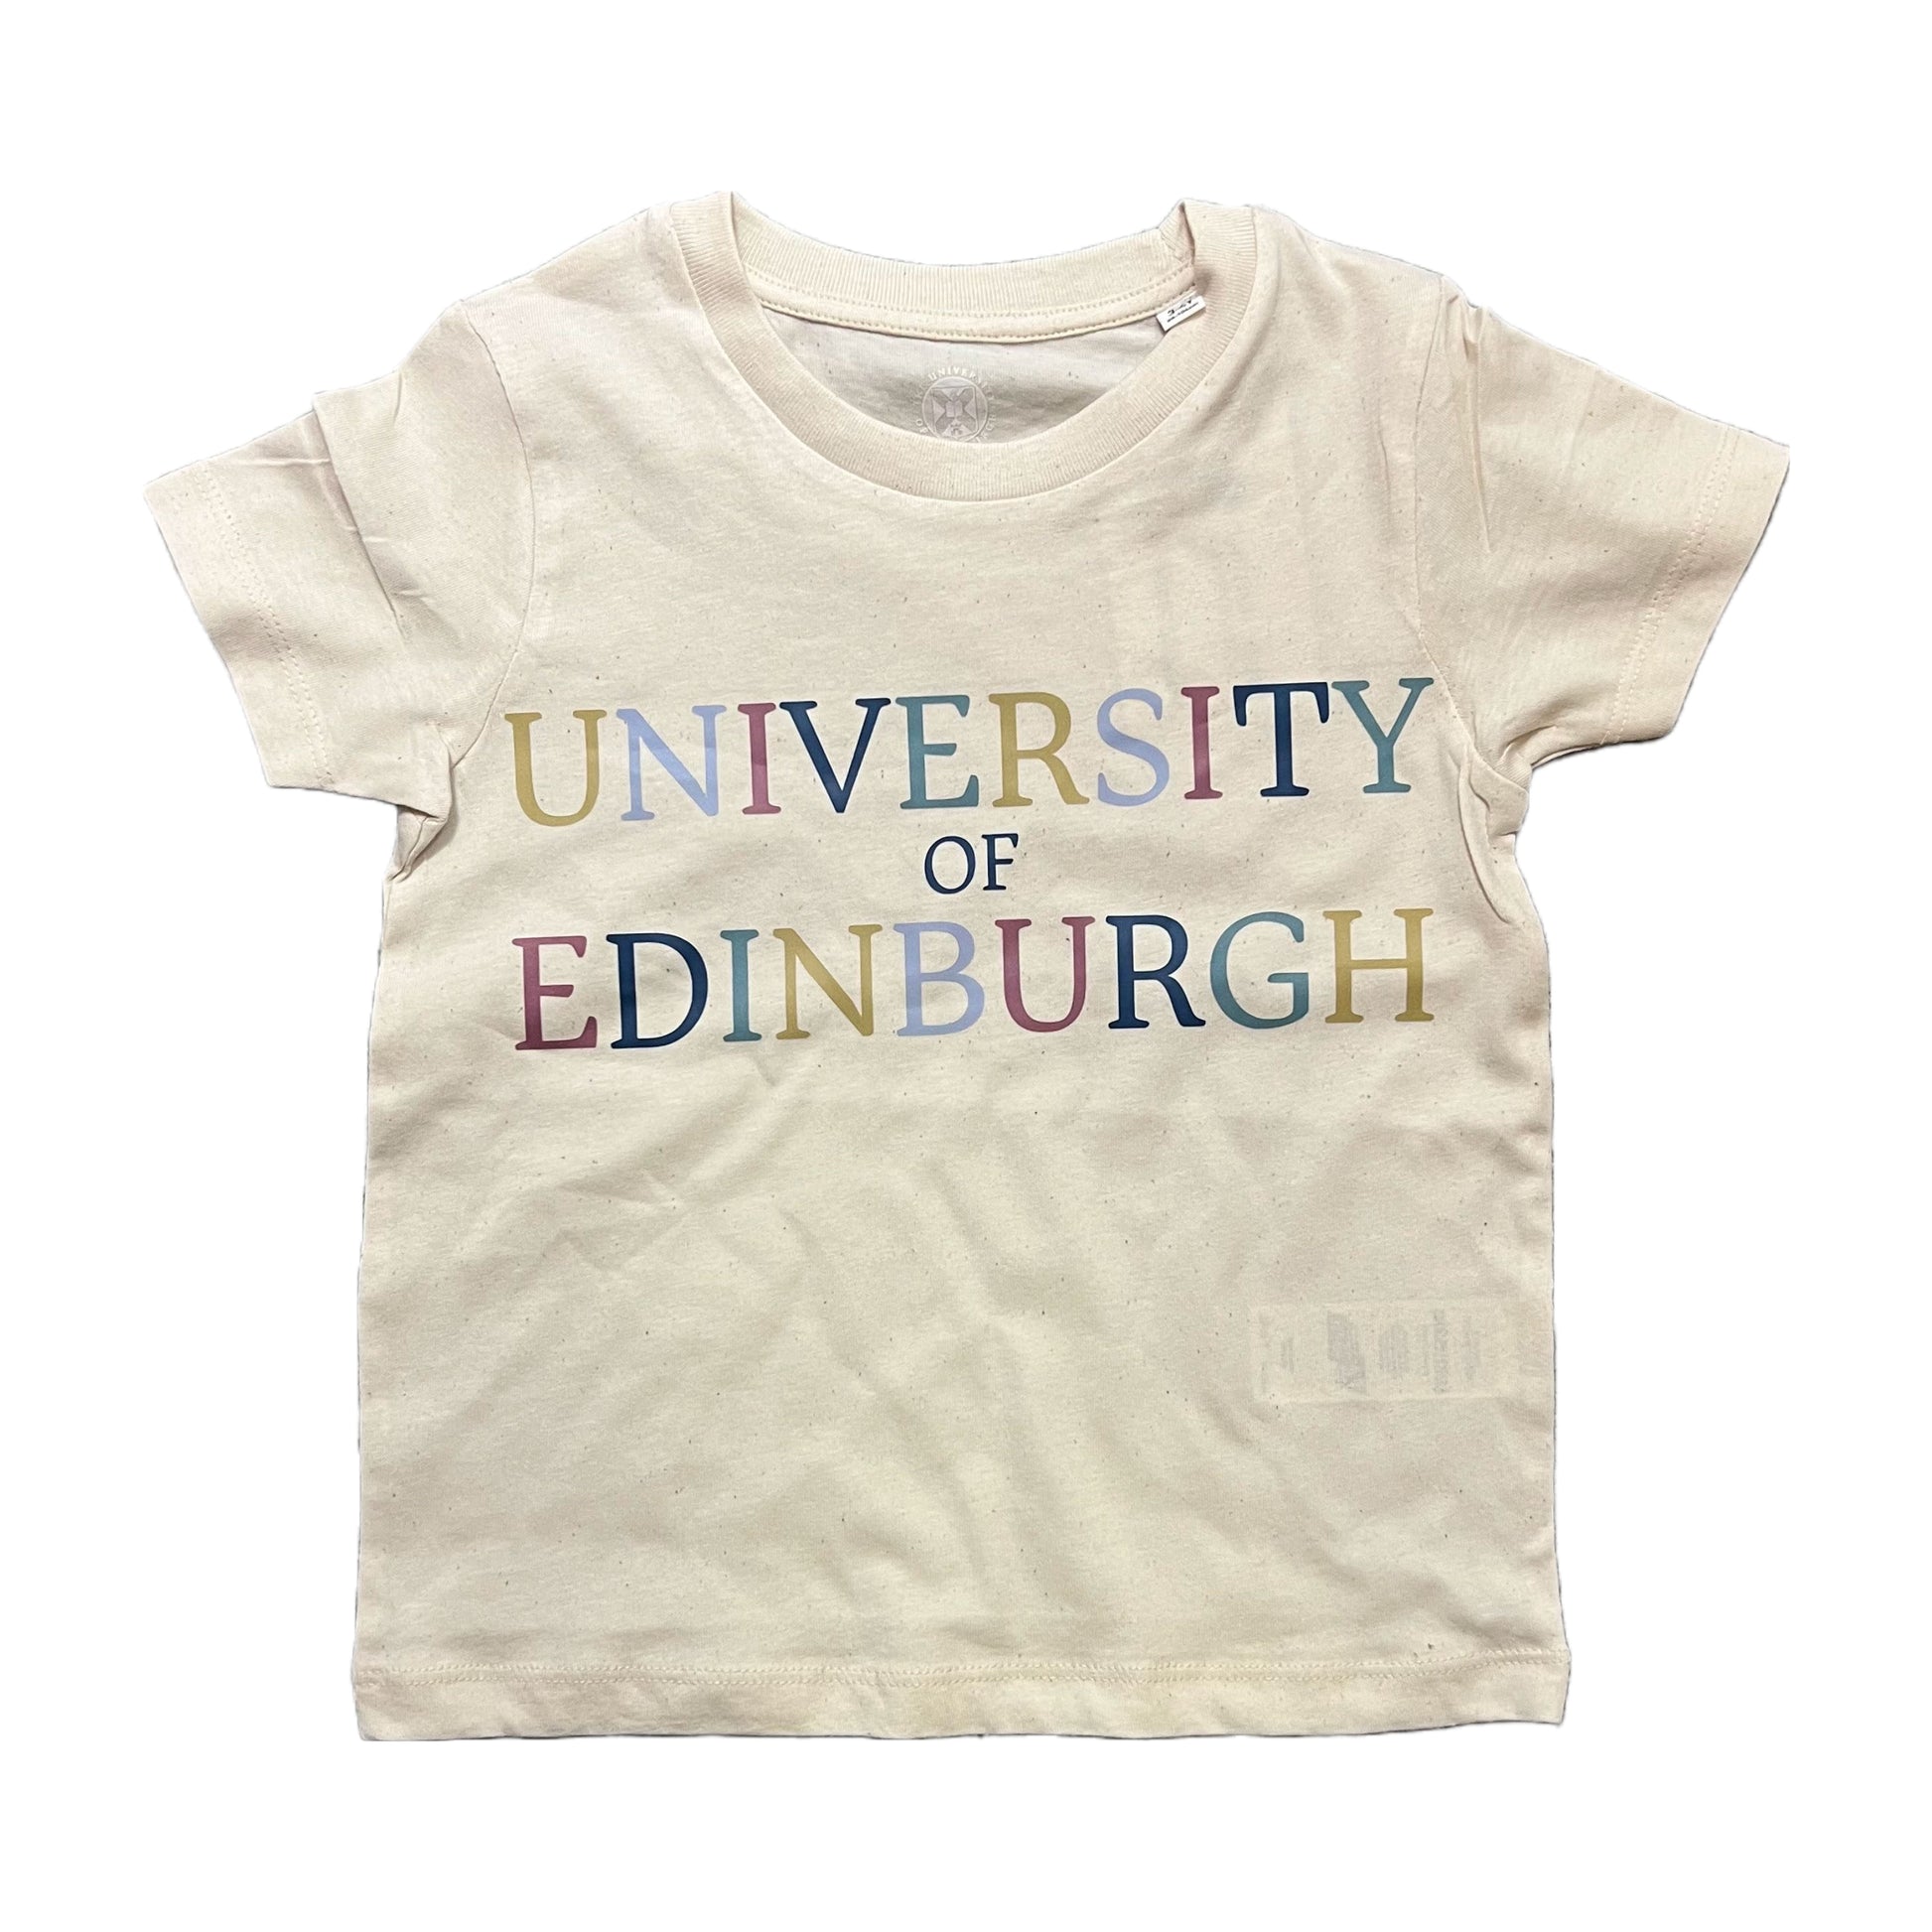 Pictured is Colourful Kids T-shirt in Natural (Sandy White). Text reads 'University of Edinburgh' in colourful lettering.